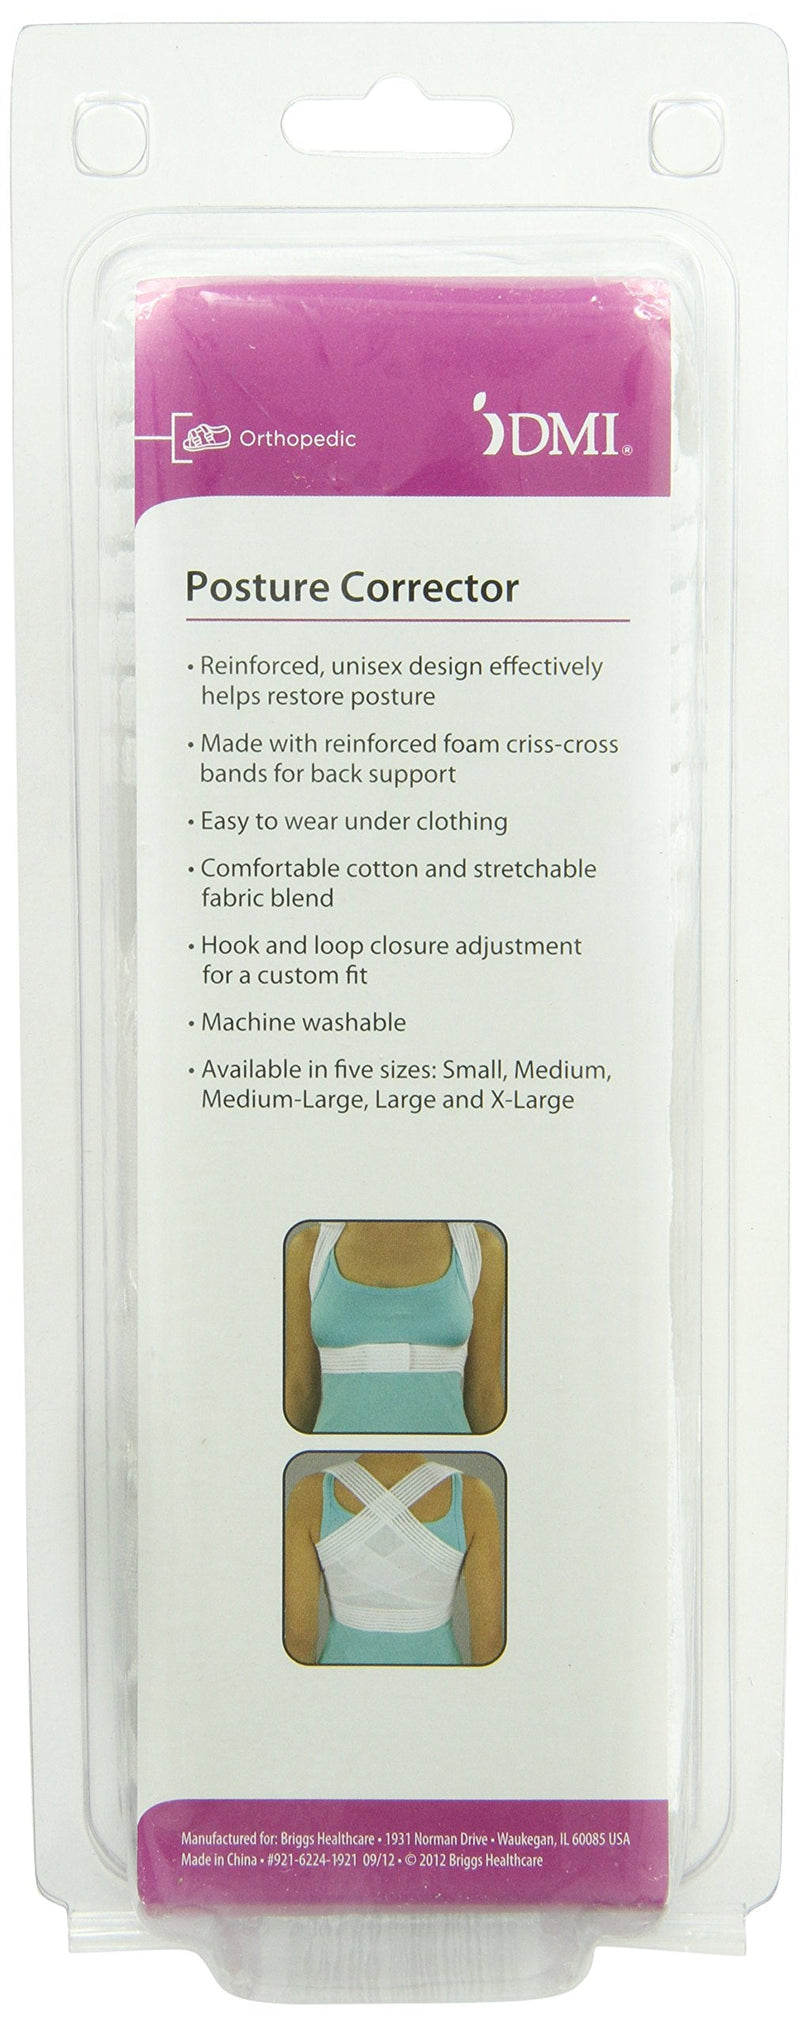 [Australia] - DMI Posture Corrector for Men and Women, Adjustable Criss-Cross Support for Reducing Back Pain and Strain, Comfortable and Breathable, Machine Washable, White, Medium, 34" to 36" Chest Size Medium (Pack of 1) 